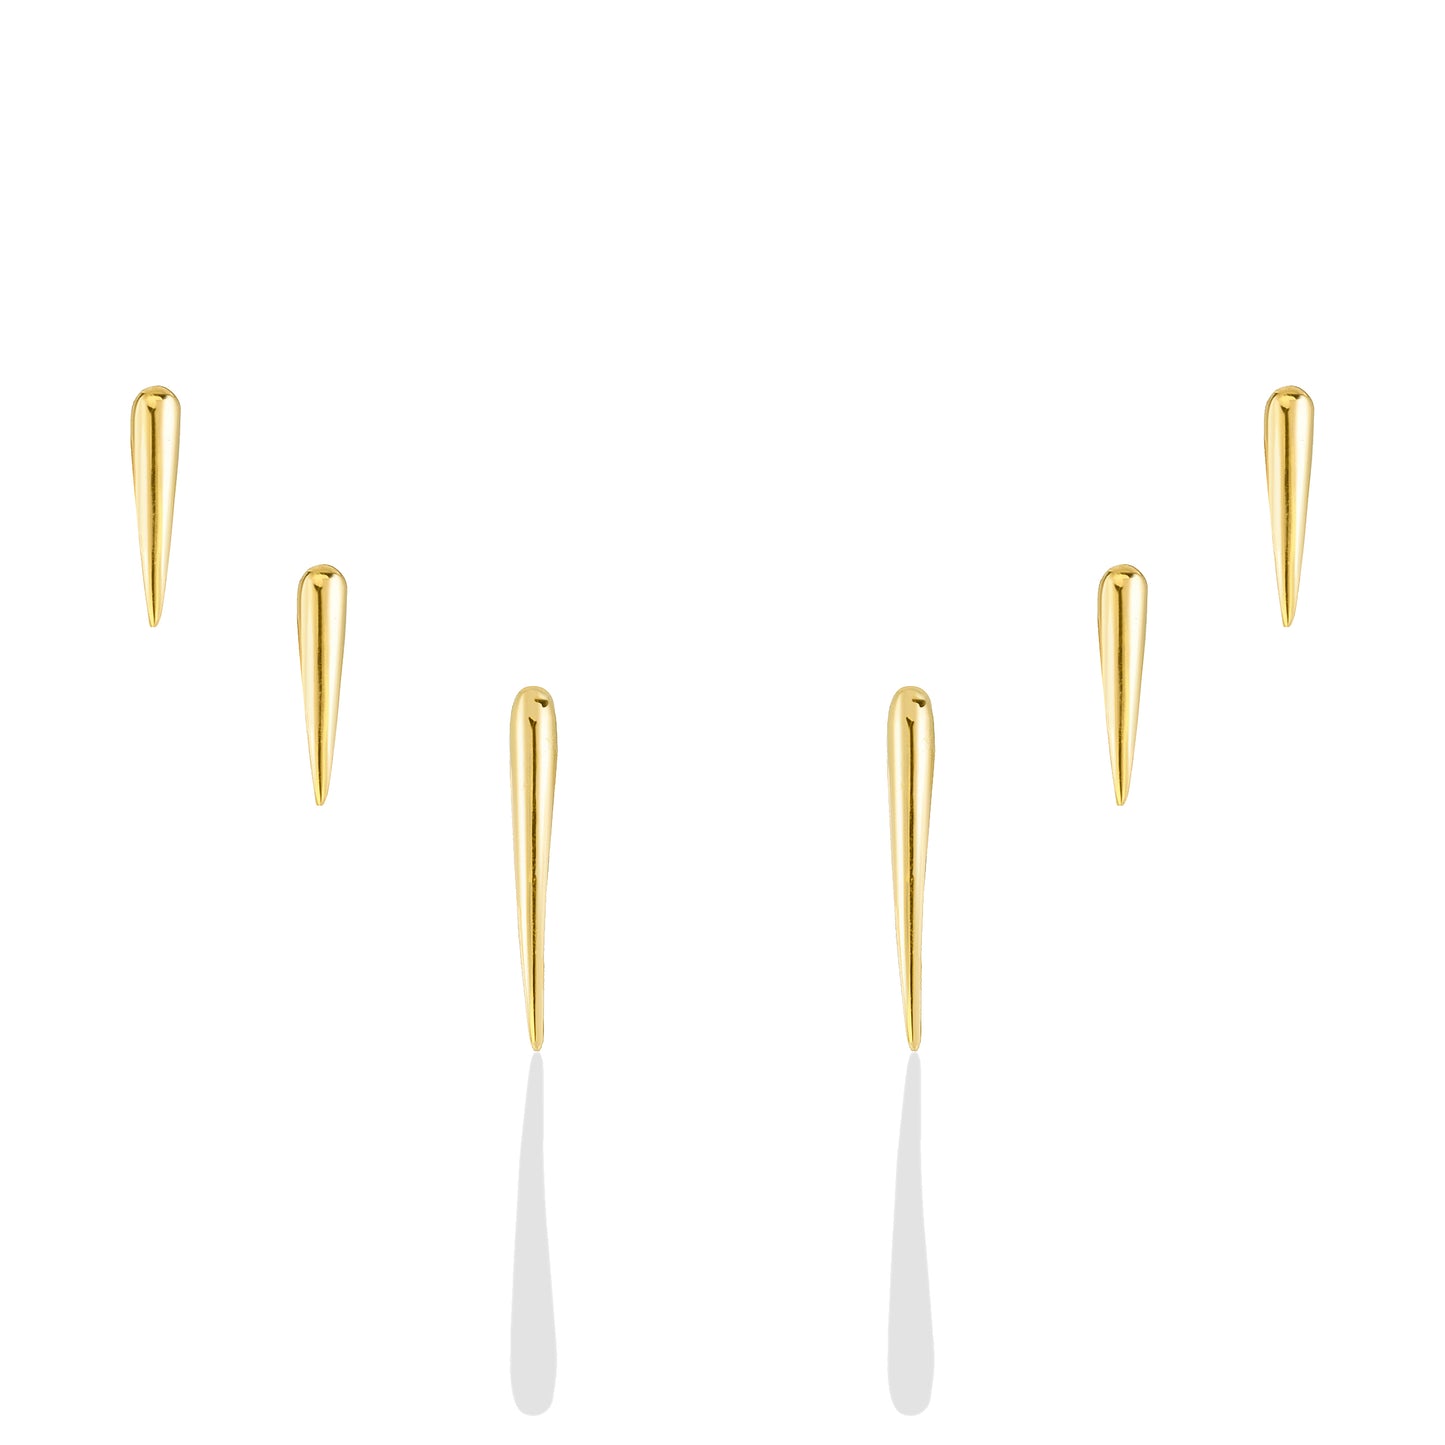 Quill Spike Studs - Small